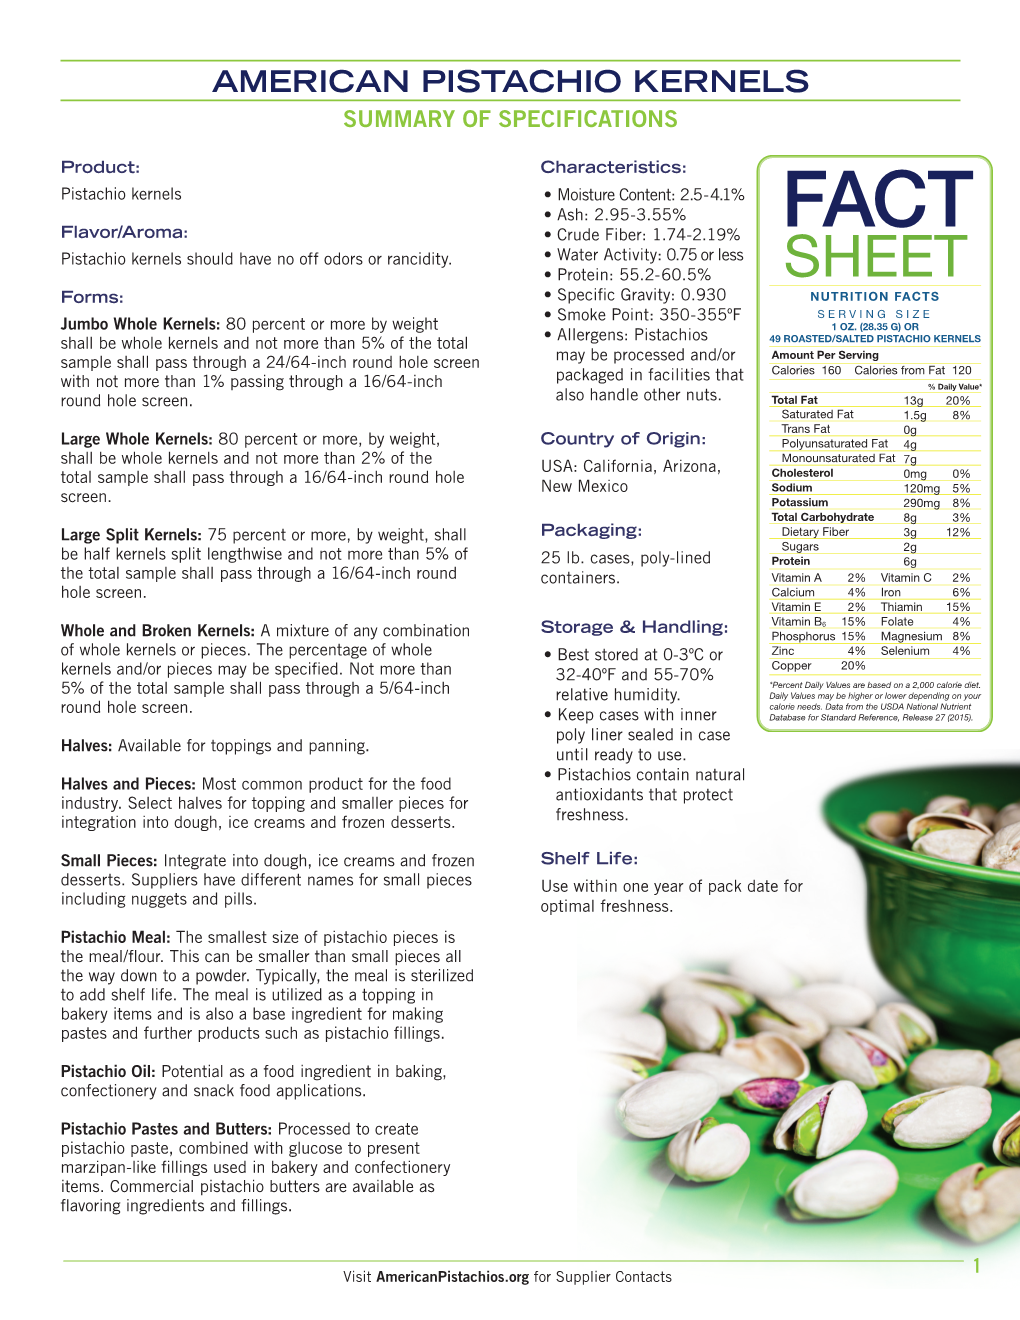 Summary of Specifications for American Pistachio Kernels